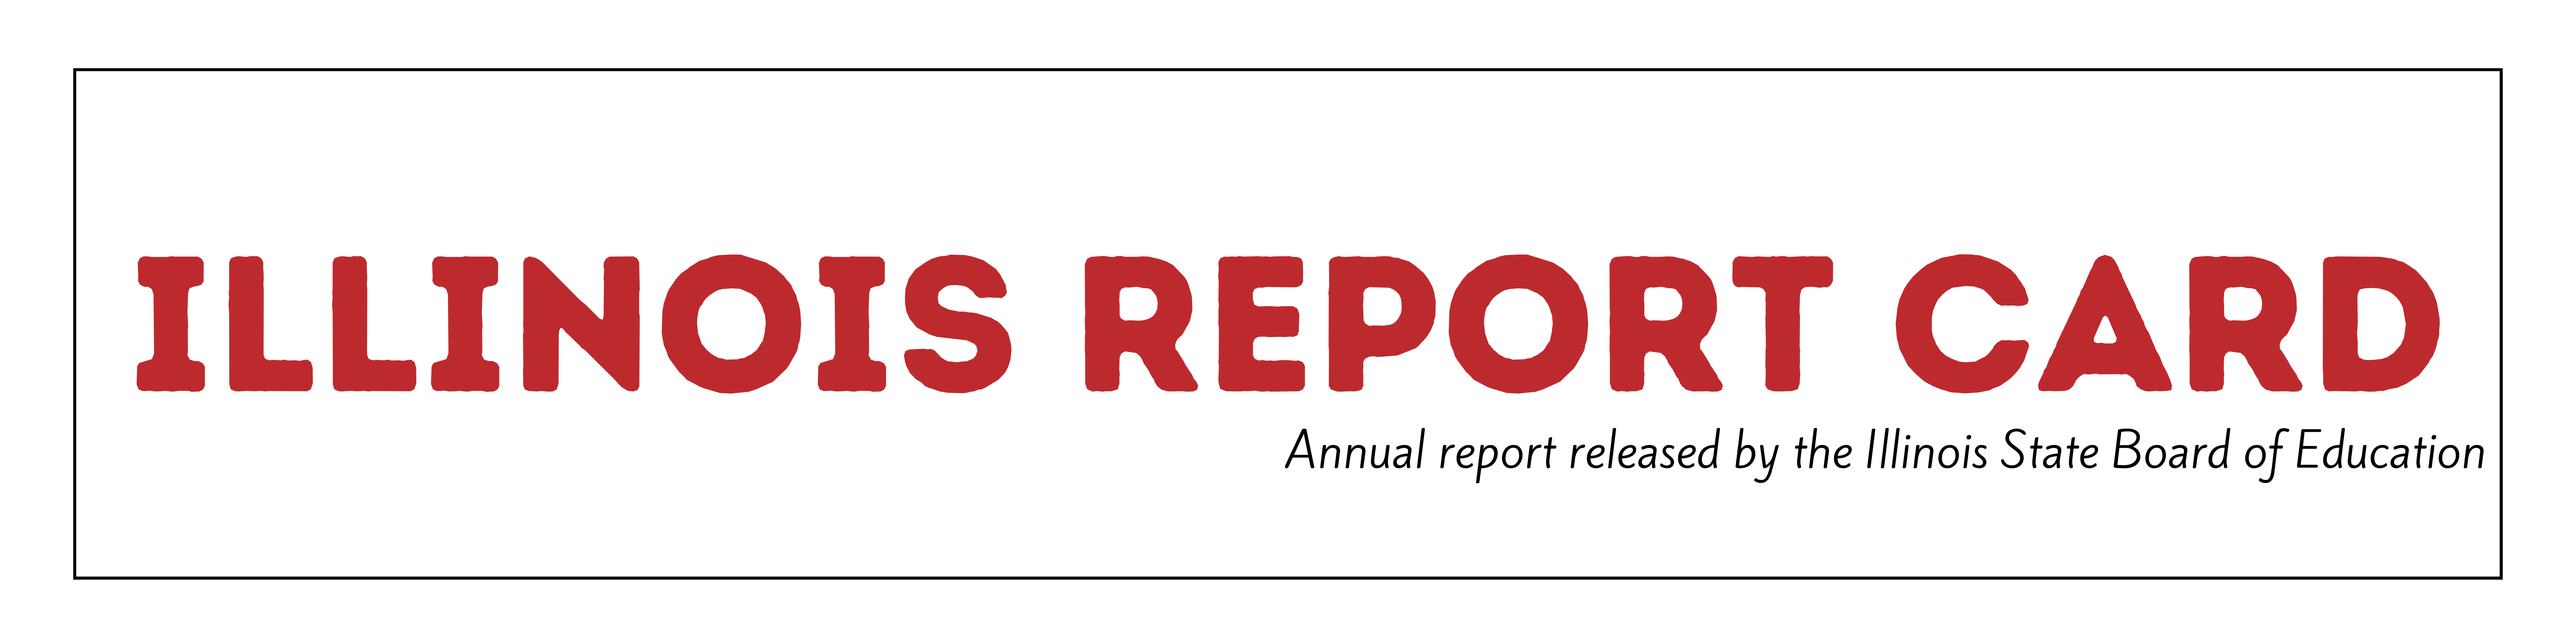 Illinois Report Card Prepared and published yearly by the Illinois State Board of Education